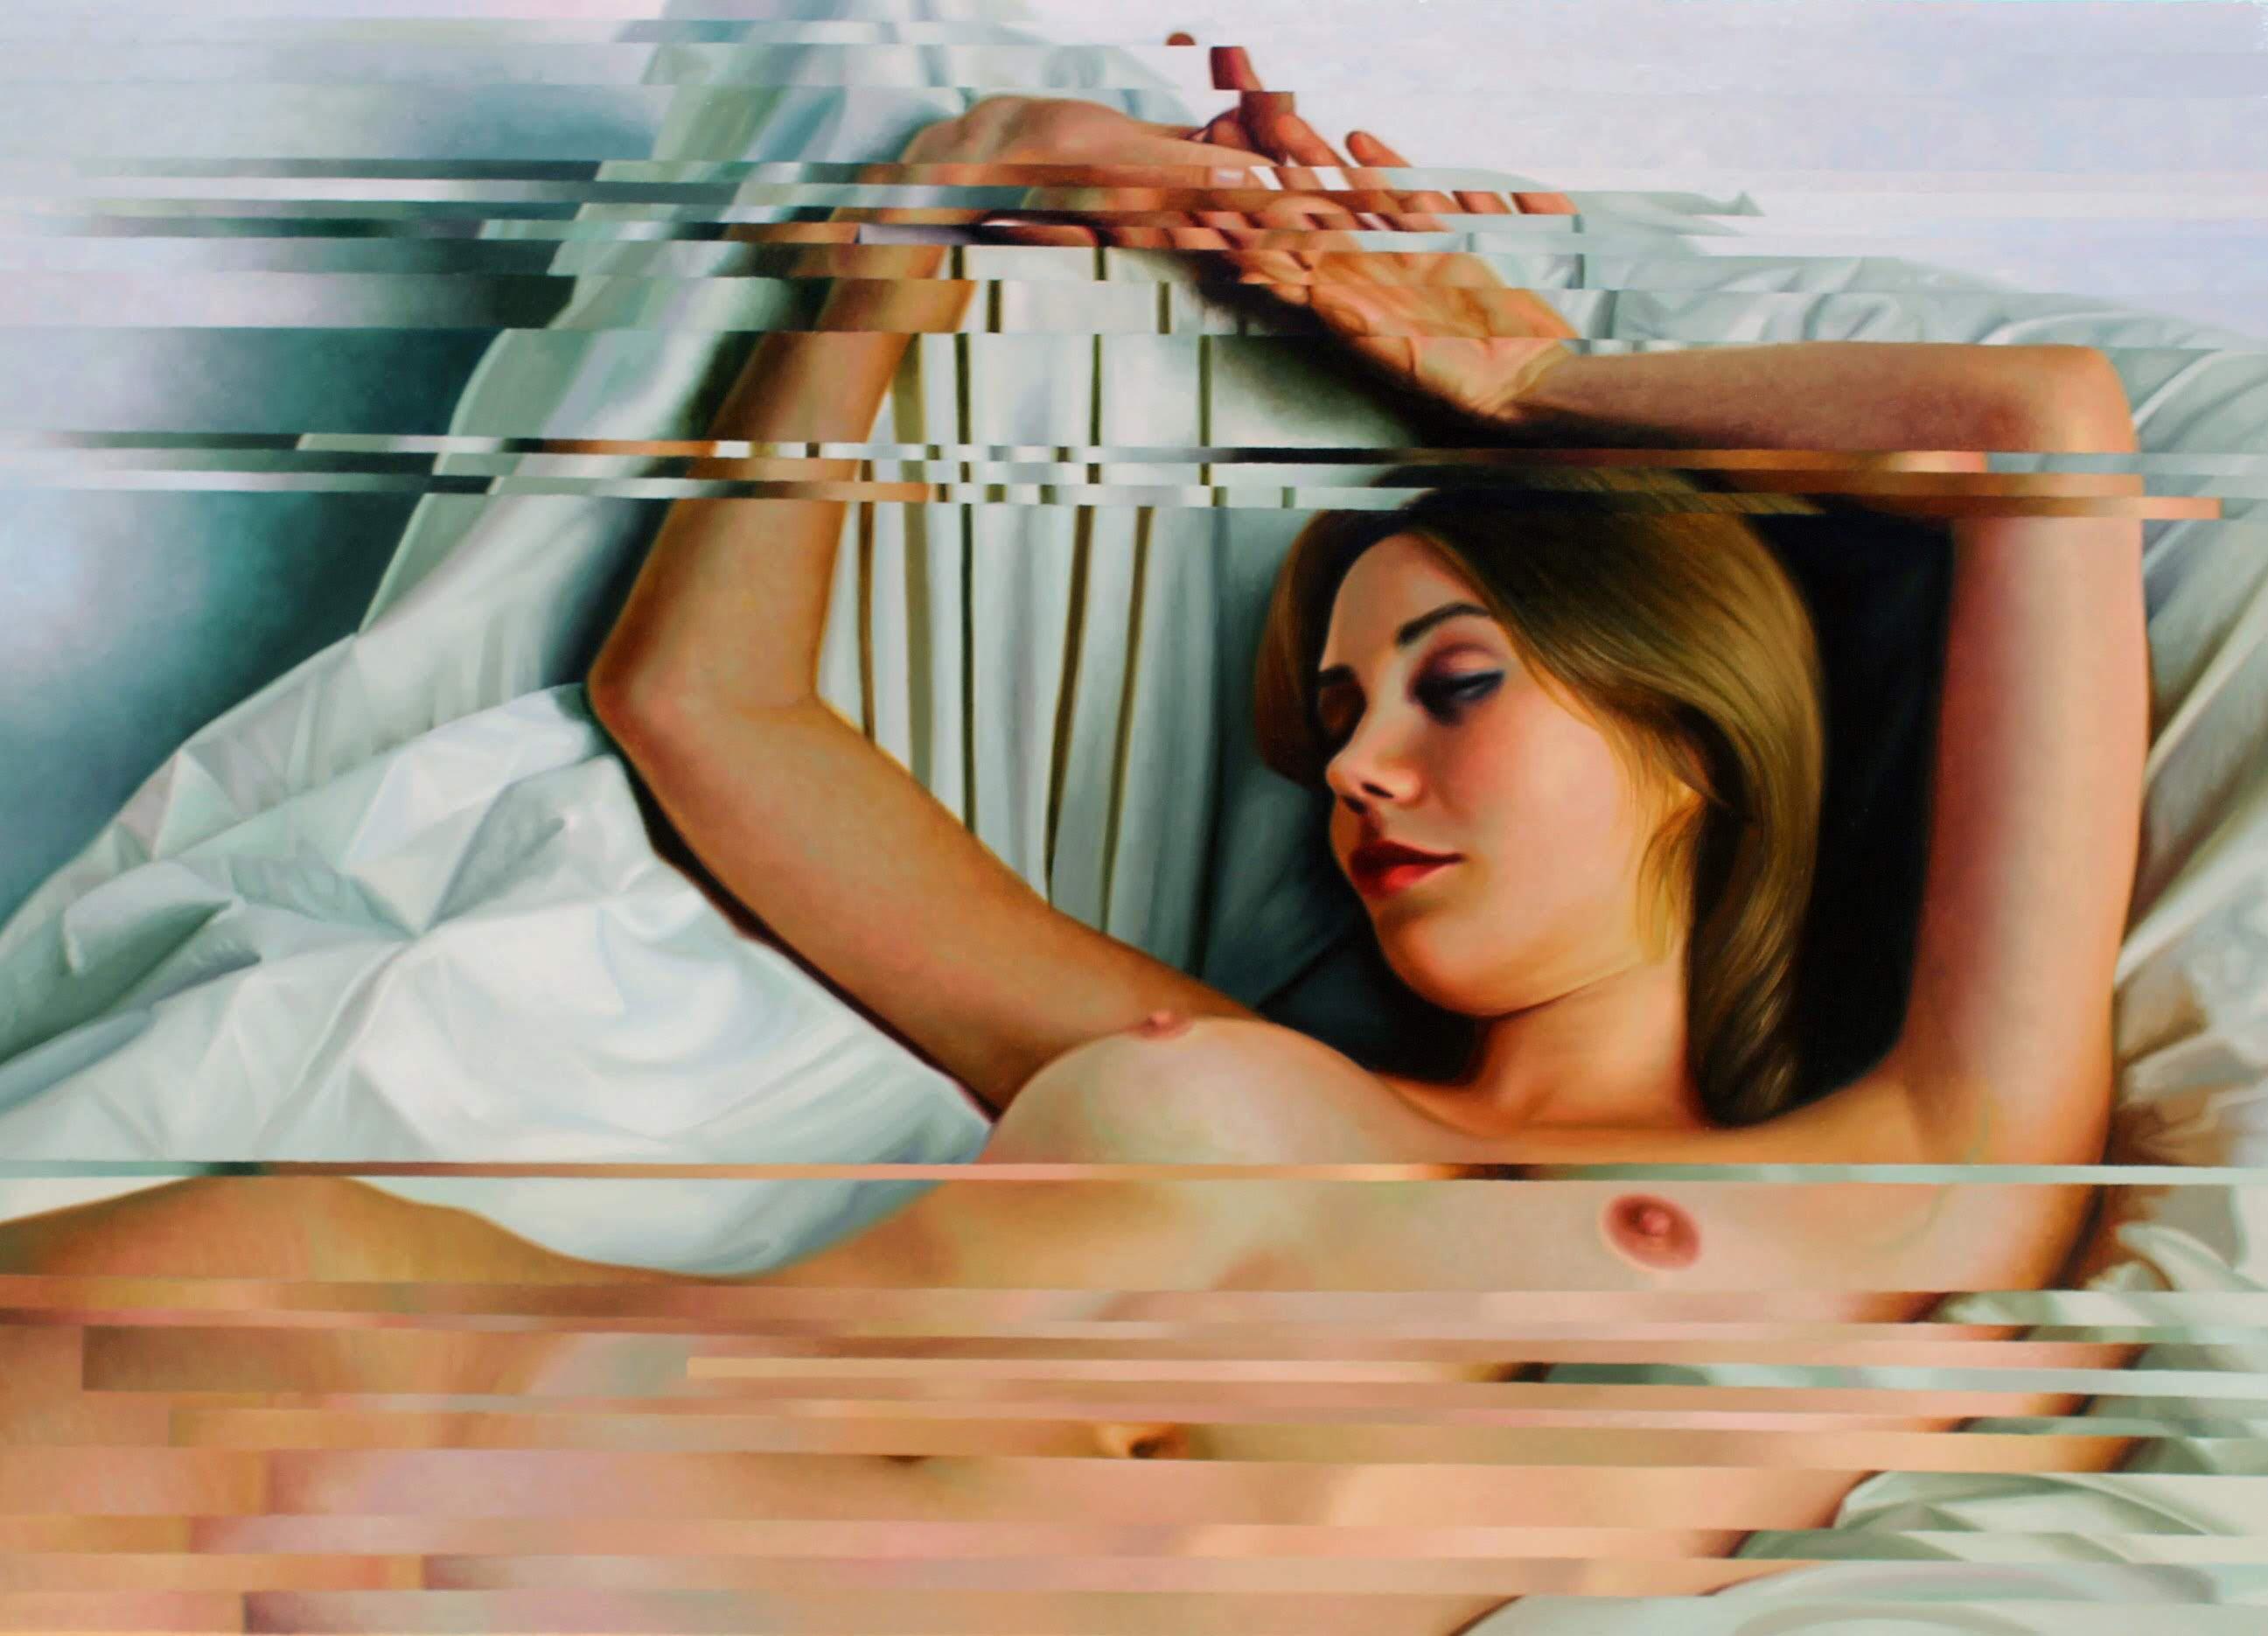 Glitch - Reclining Female Nude, Distorted with Lines, Oil on Canvas